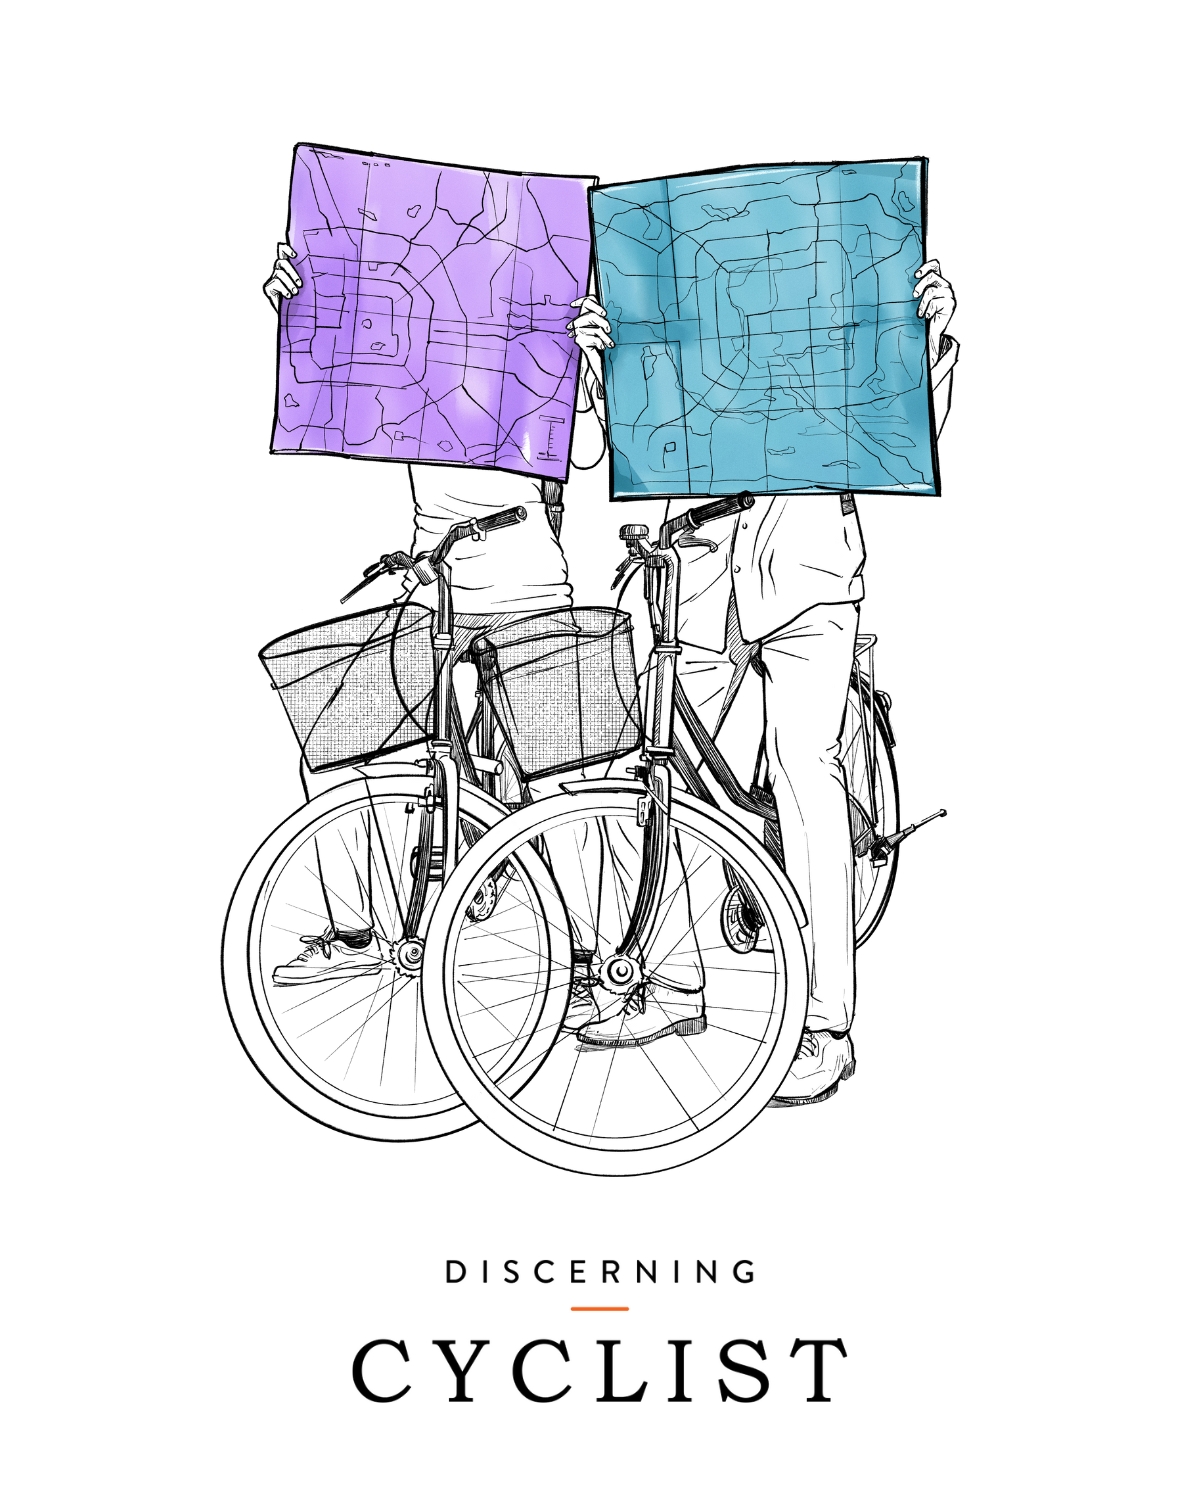 Lost cyclists holding map illustration